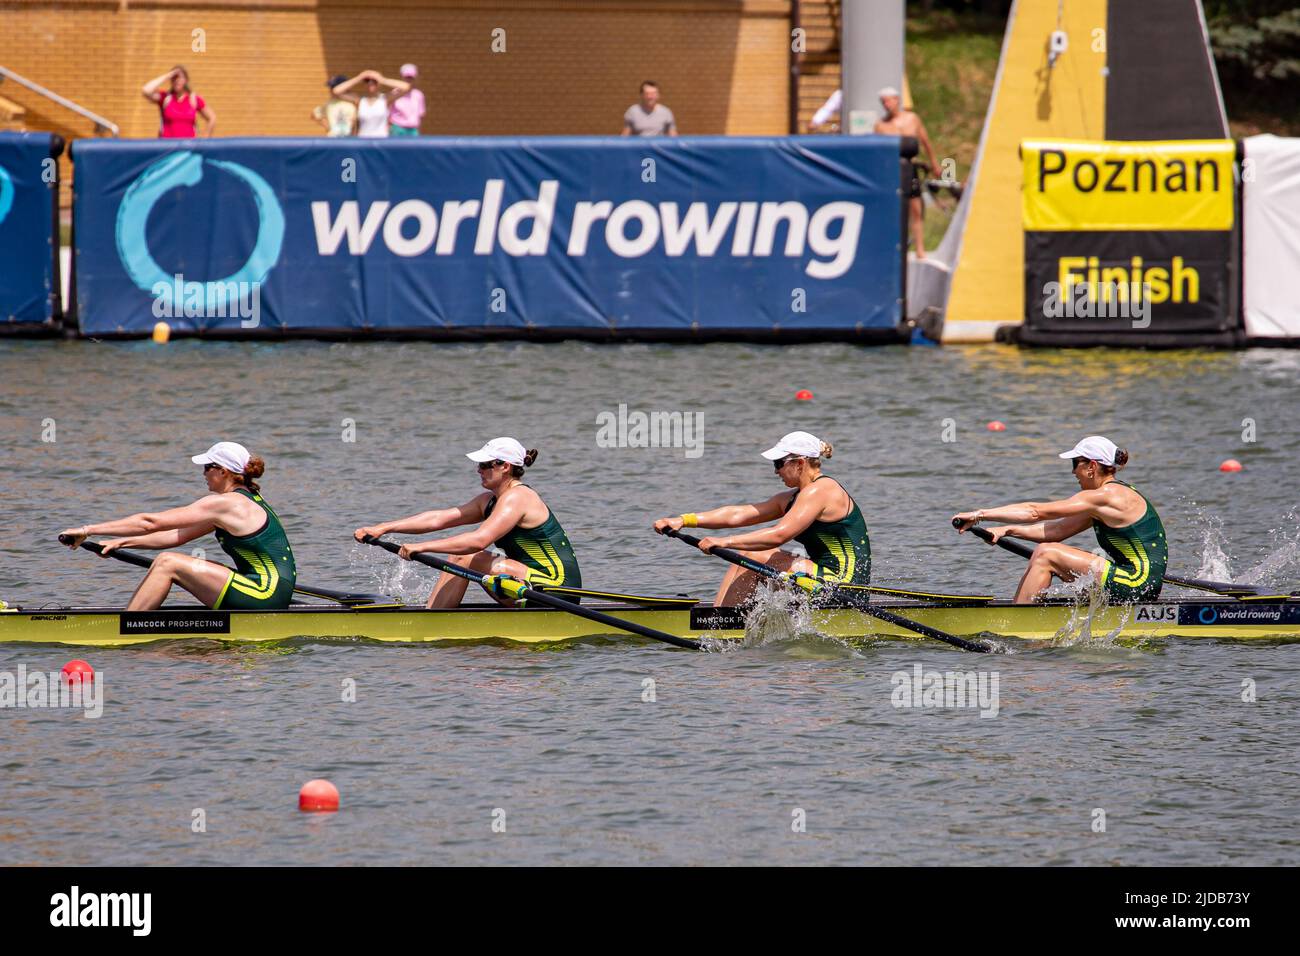 Poznan, Poland. 19th June, 2022. Lucy Stephan, Katrina Werry, Bronwyn Cox and Annabelle Mcintyre of Australia (from R to L) compete during Women's Four Final of the 2022 World Rowing Cup II on Lake Malta in Poznan, Poland, June 19, 2022. Credit: Pawel Jaskolka/Xinhua/Alamy Live News Stock Photo